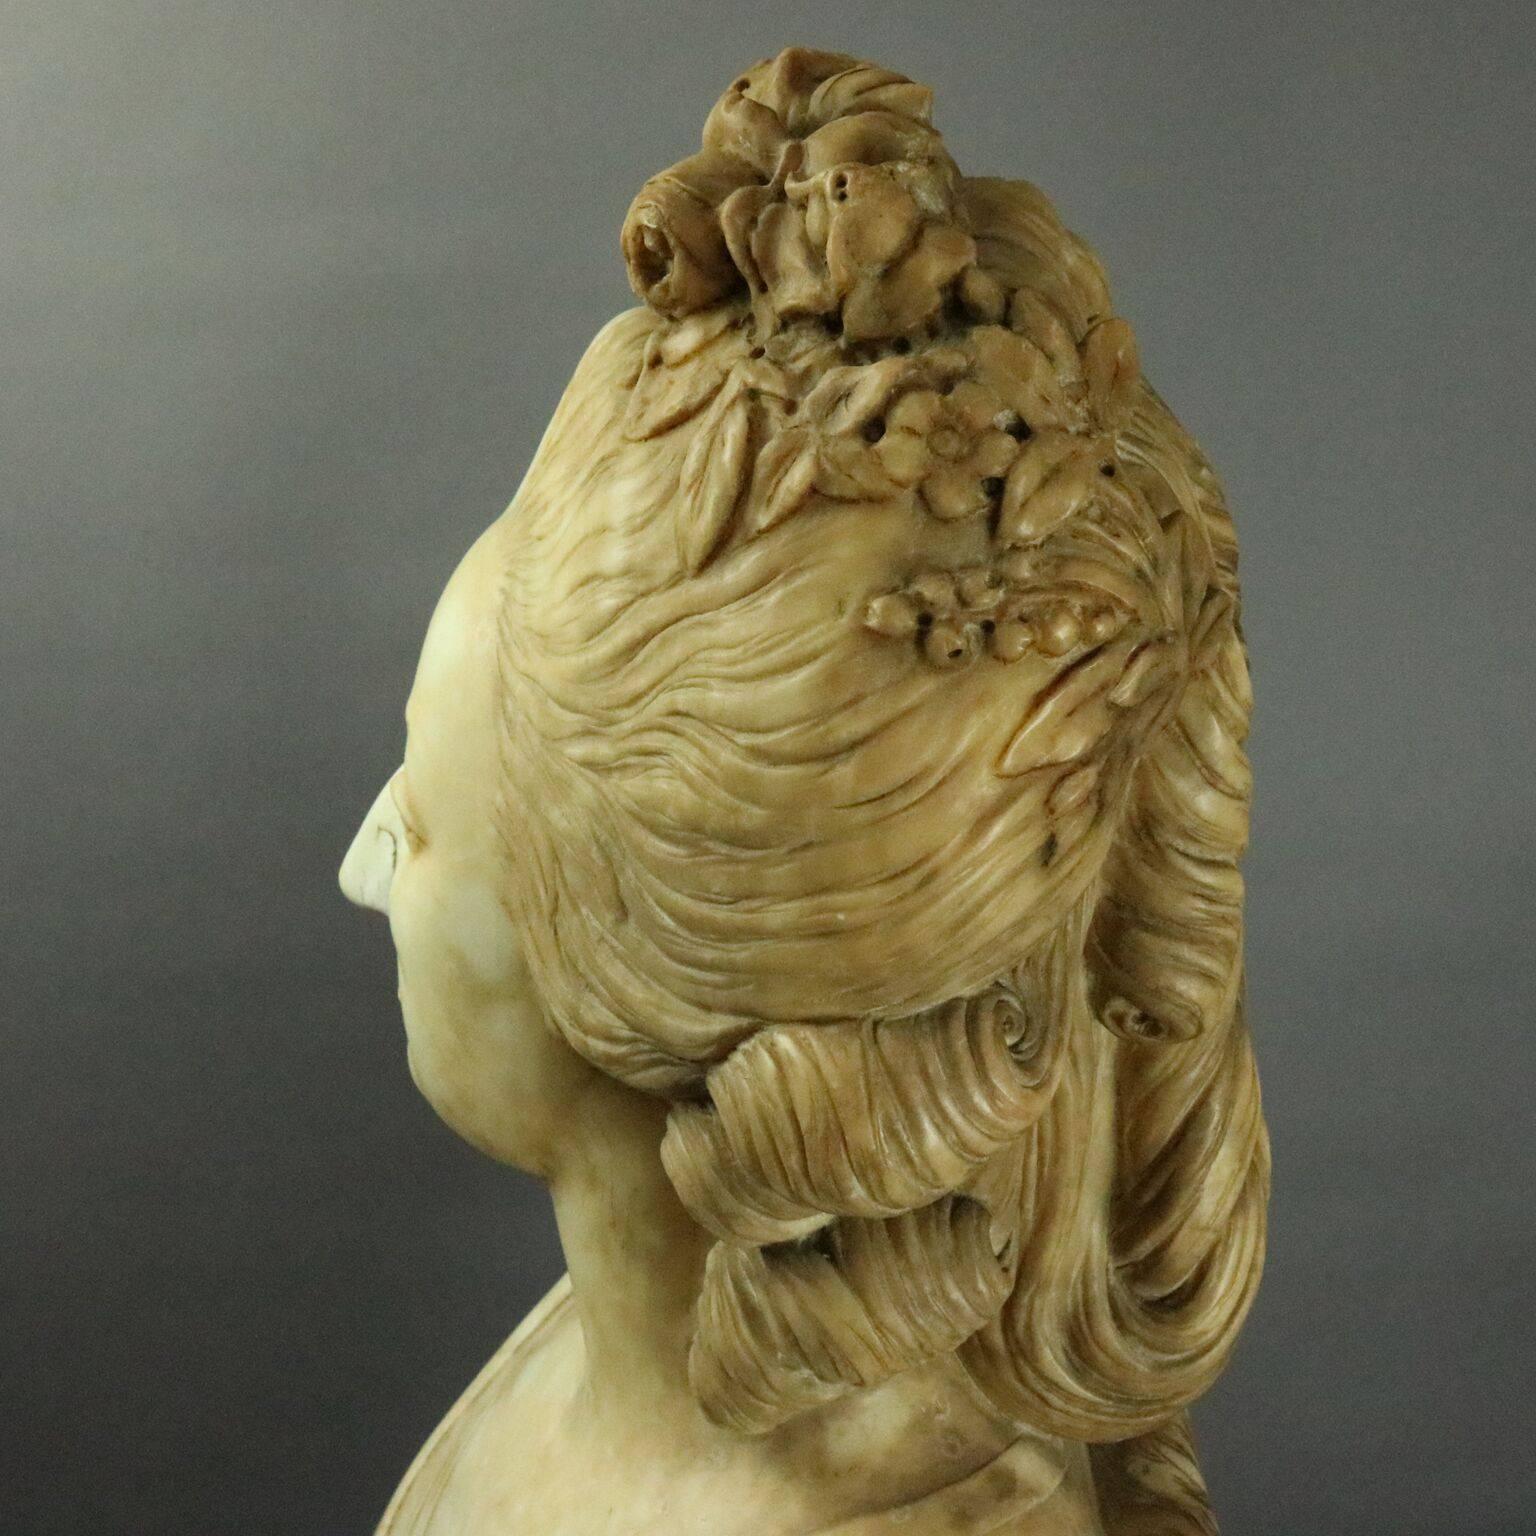 Hand-Carved Antique Italian Carved Marble Bust after Houdon of Marie Antoinette, circa 1850